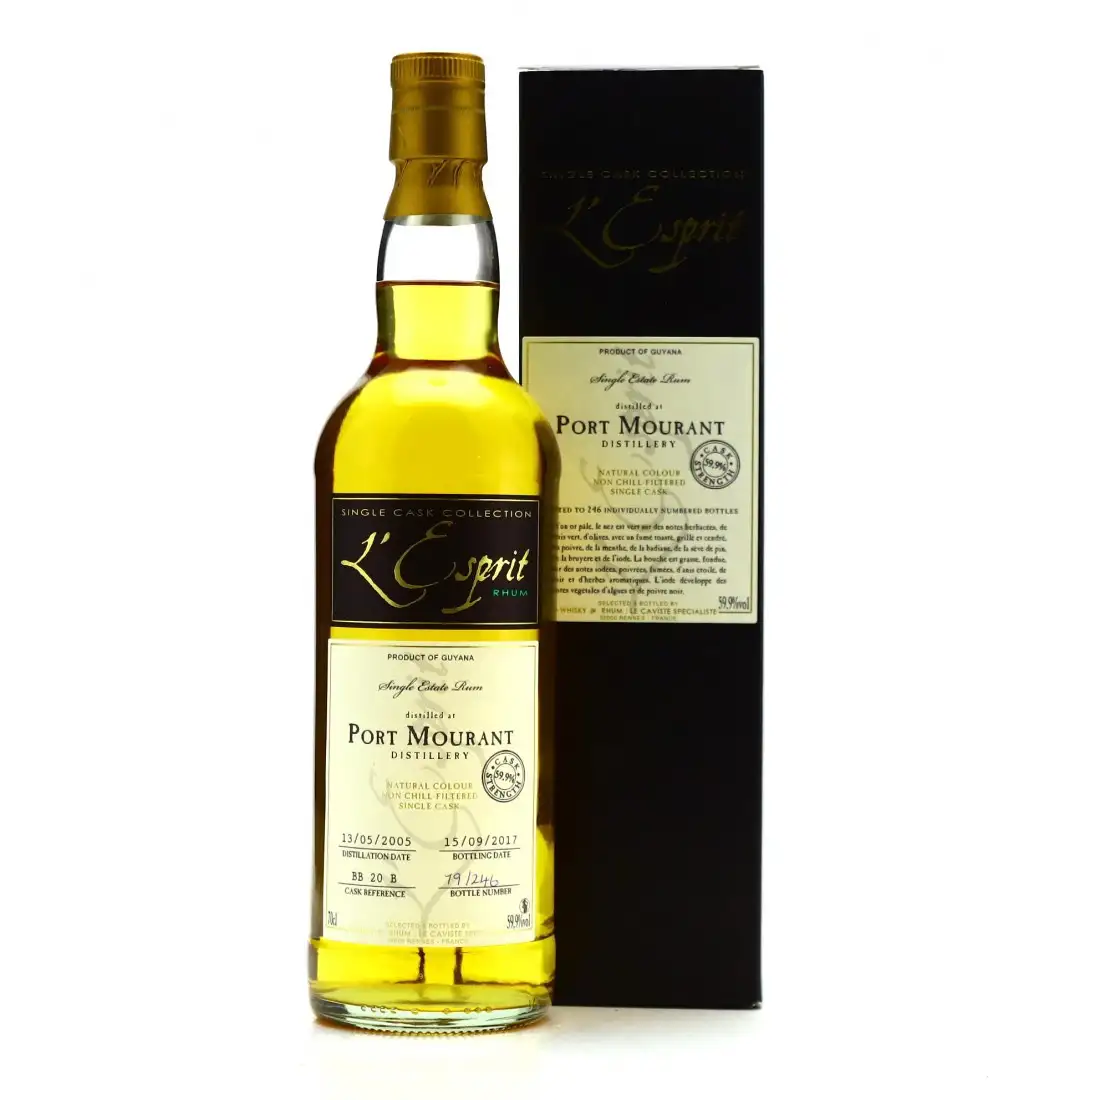 Image of the front of the bottle of the rum L‘Esprit